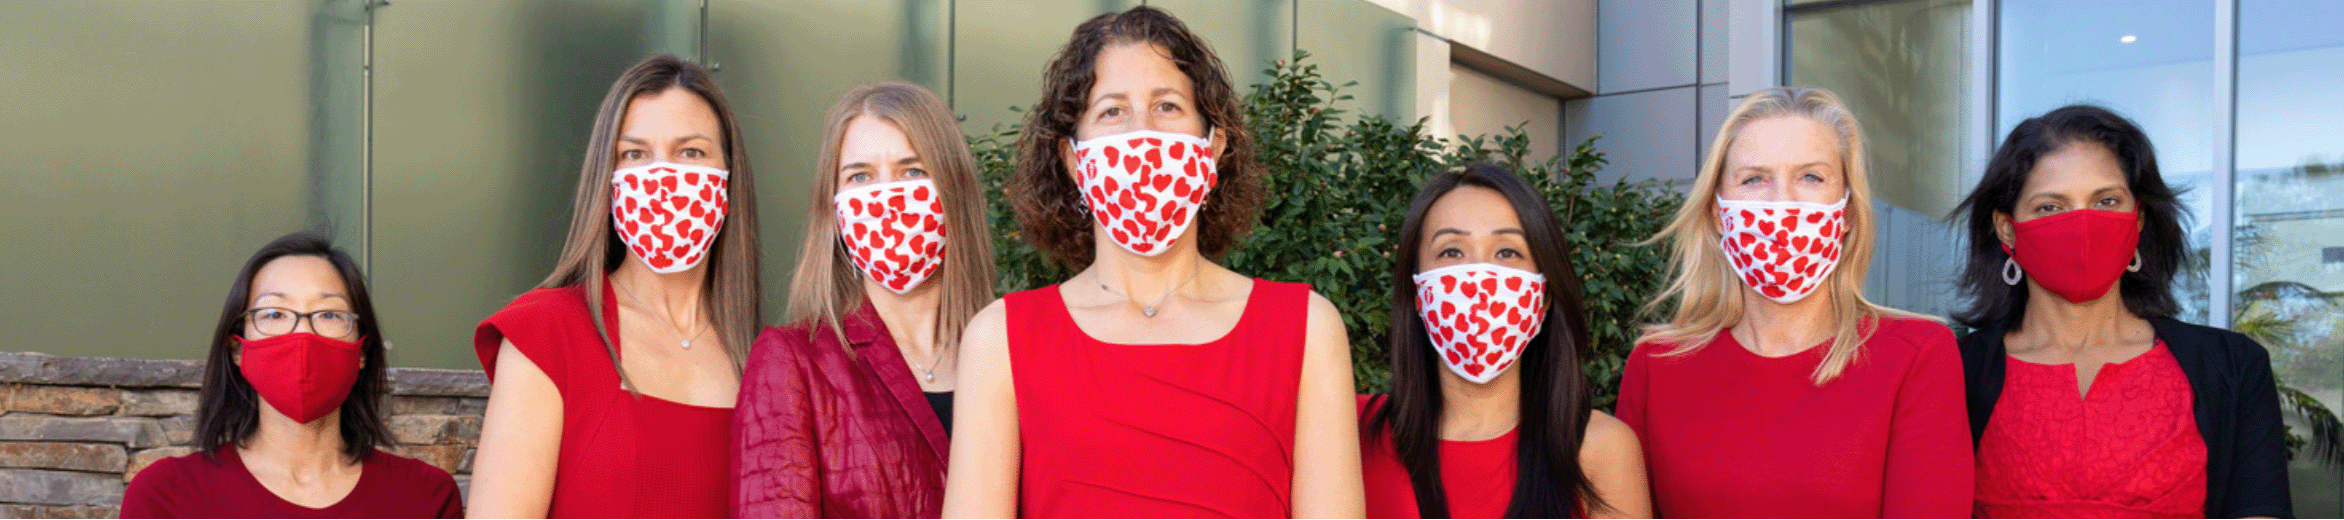 Women Cardiologists at UCSD wear red